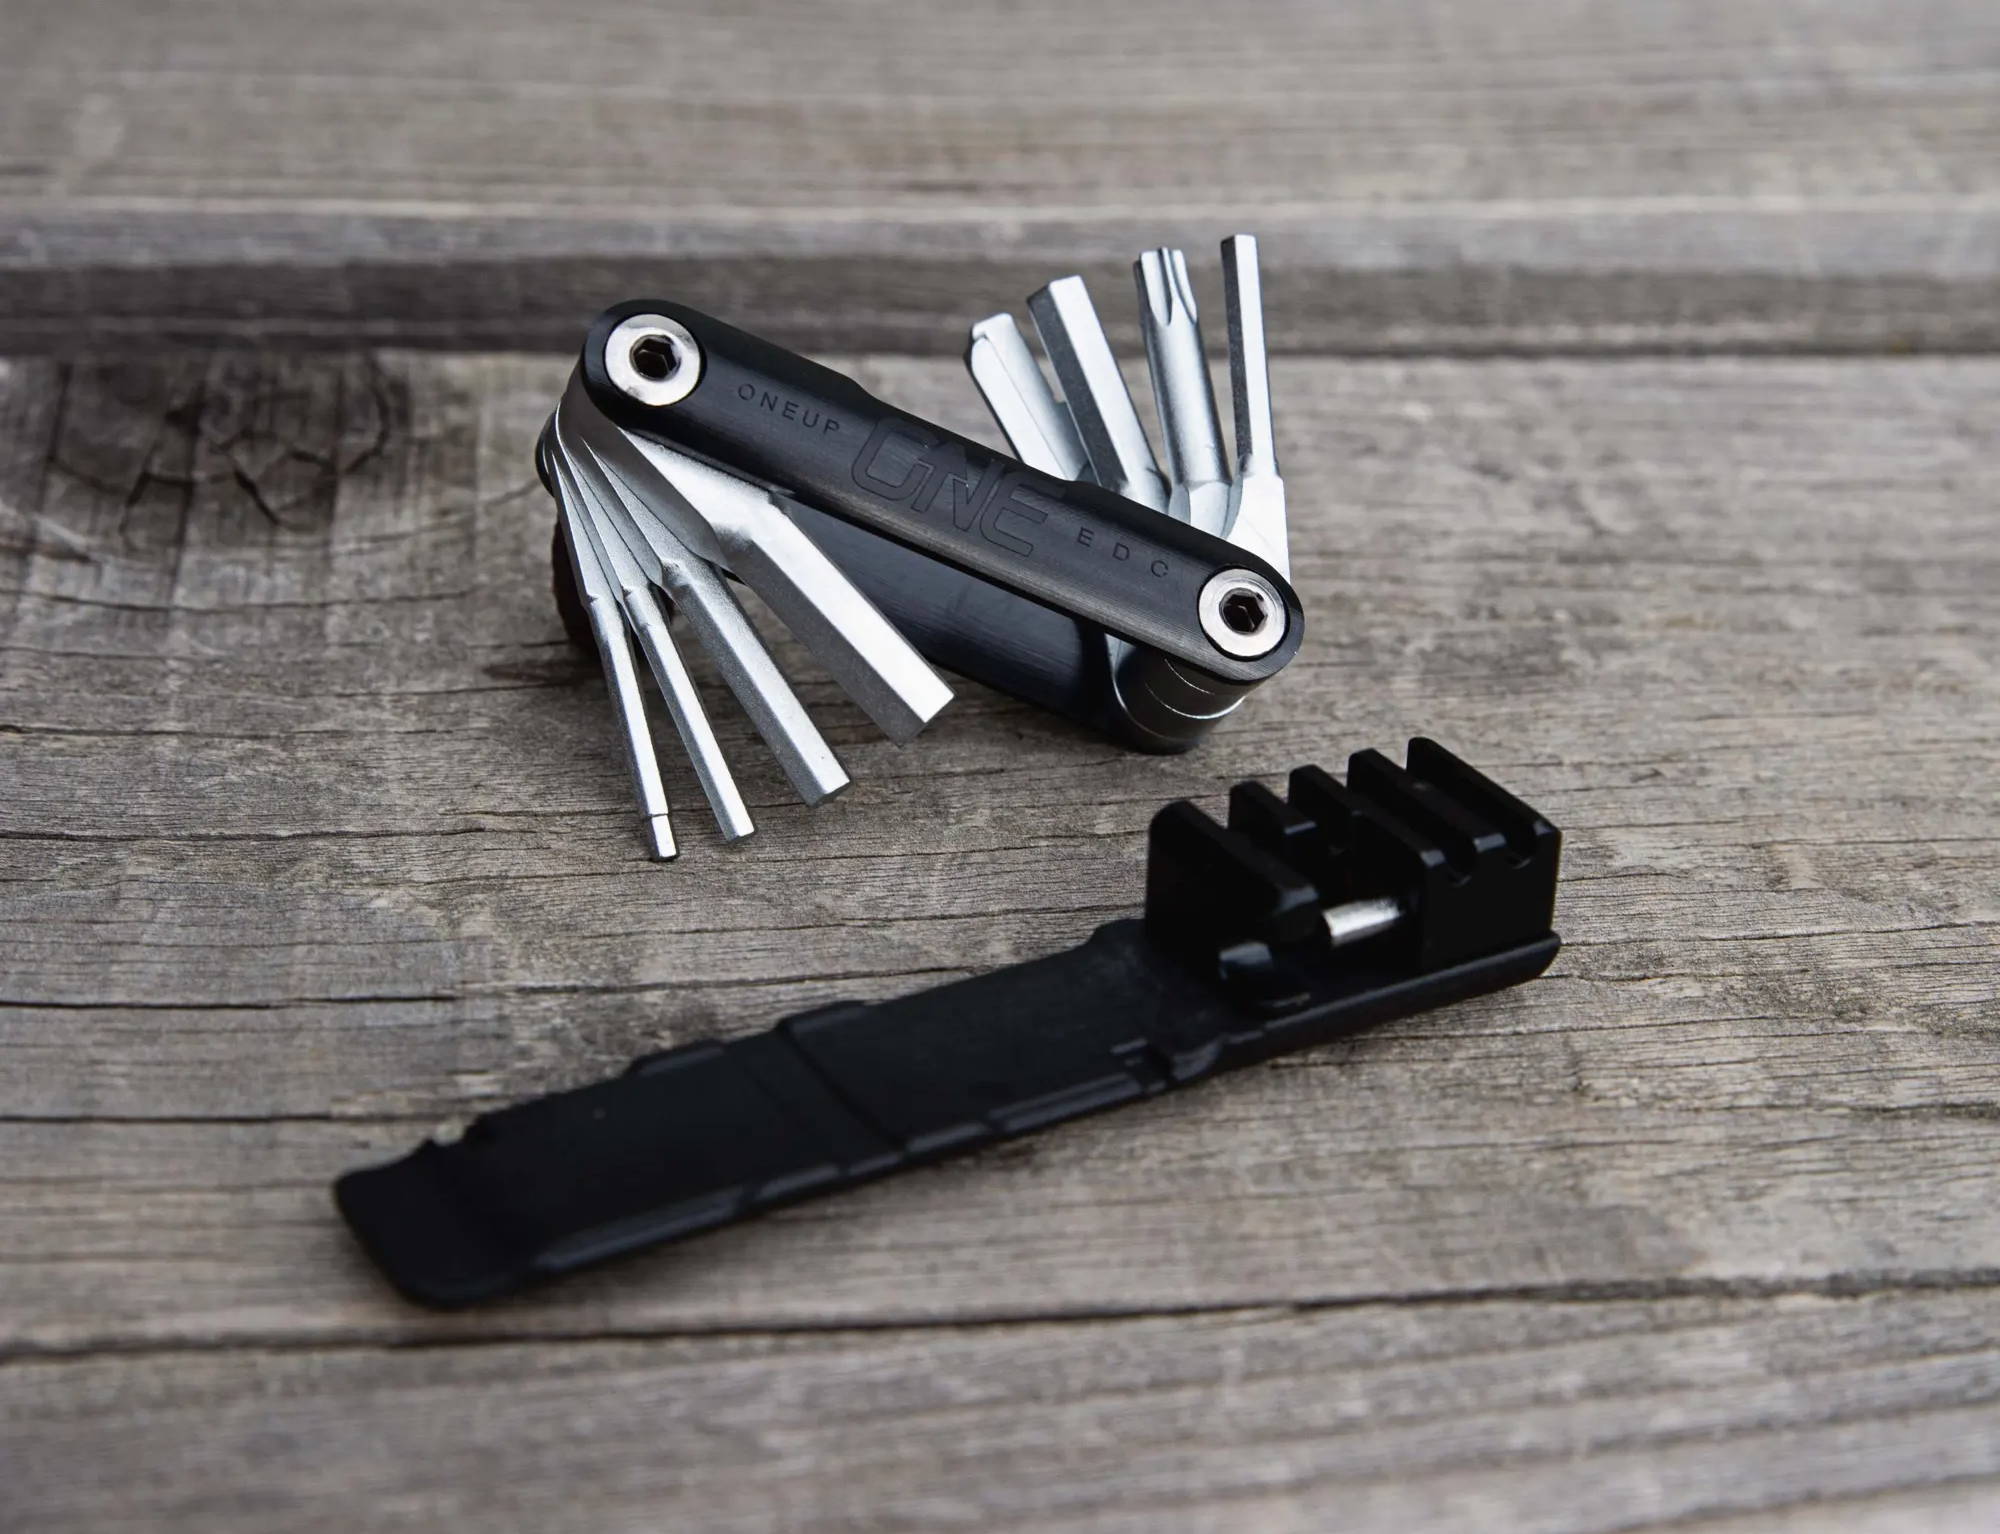 OneUp Components EDC V2 multi tool on a wood surface